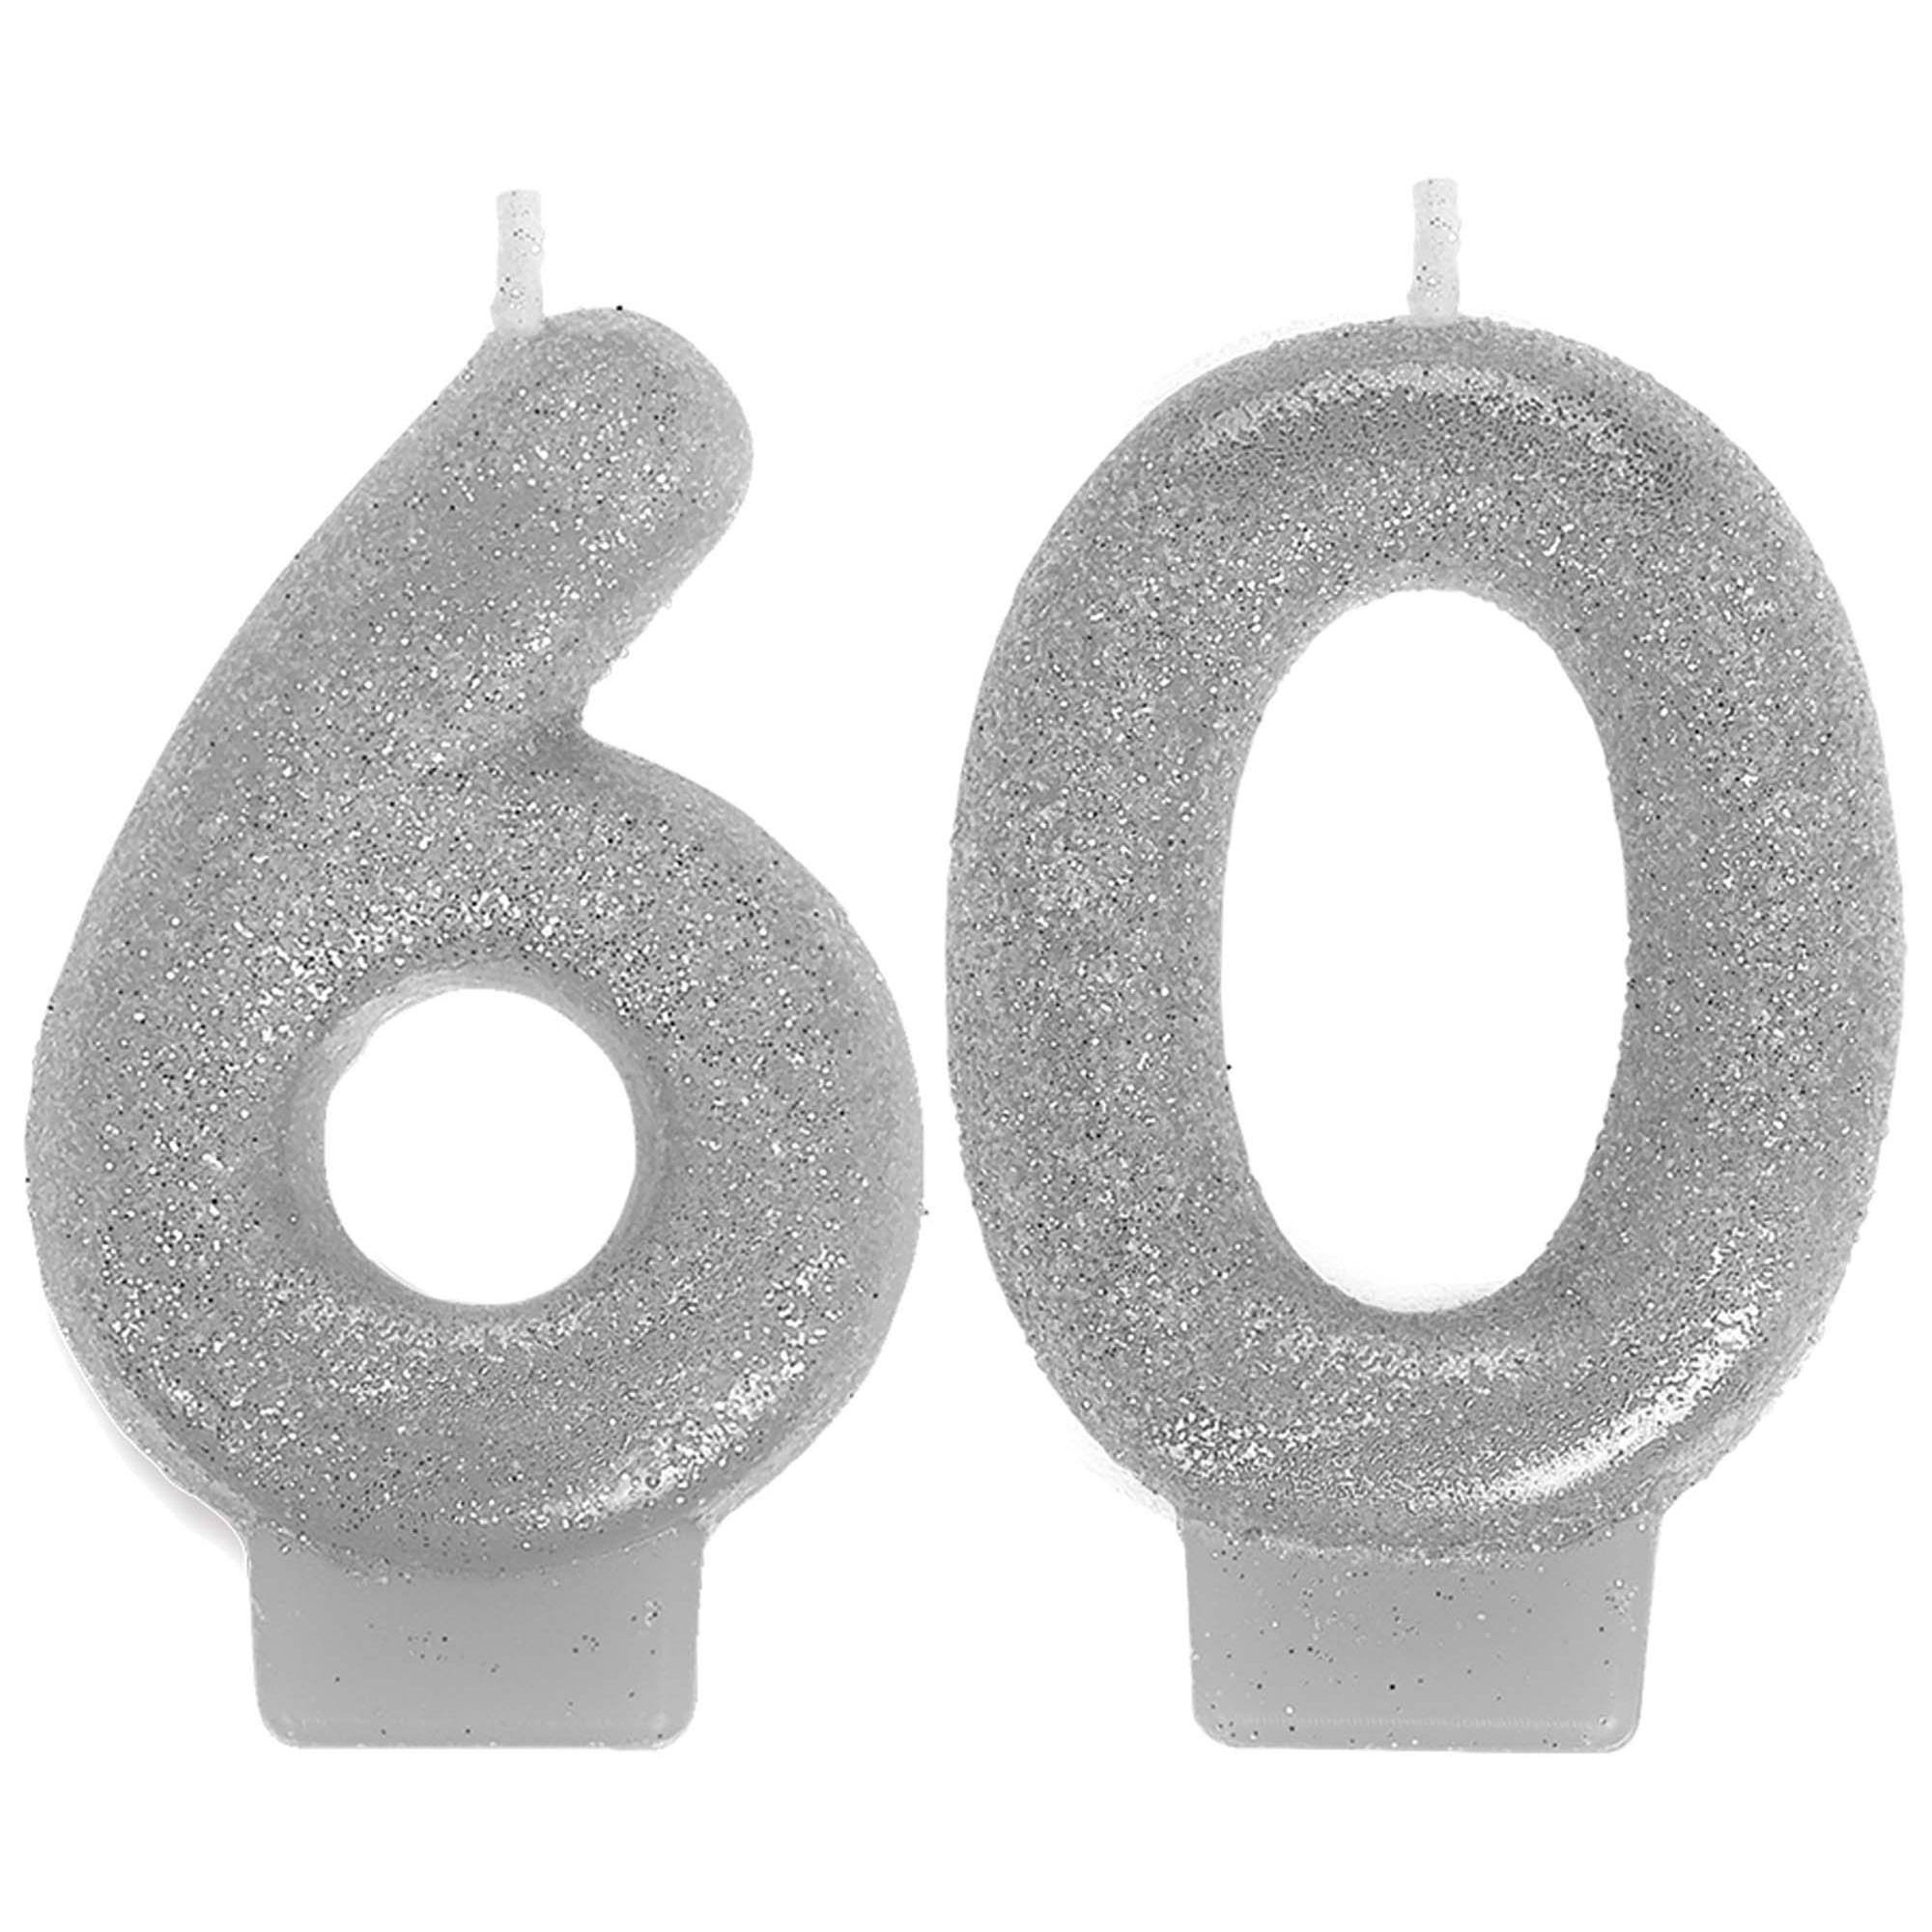 Sparkling Celebration 60th Candle - 2.75" x 1.75", 1ct